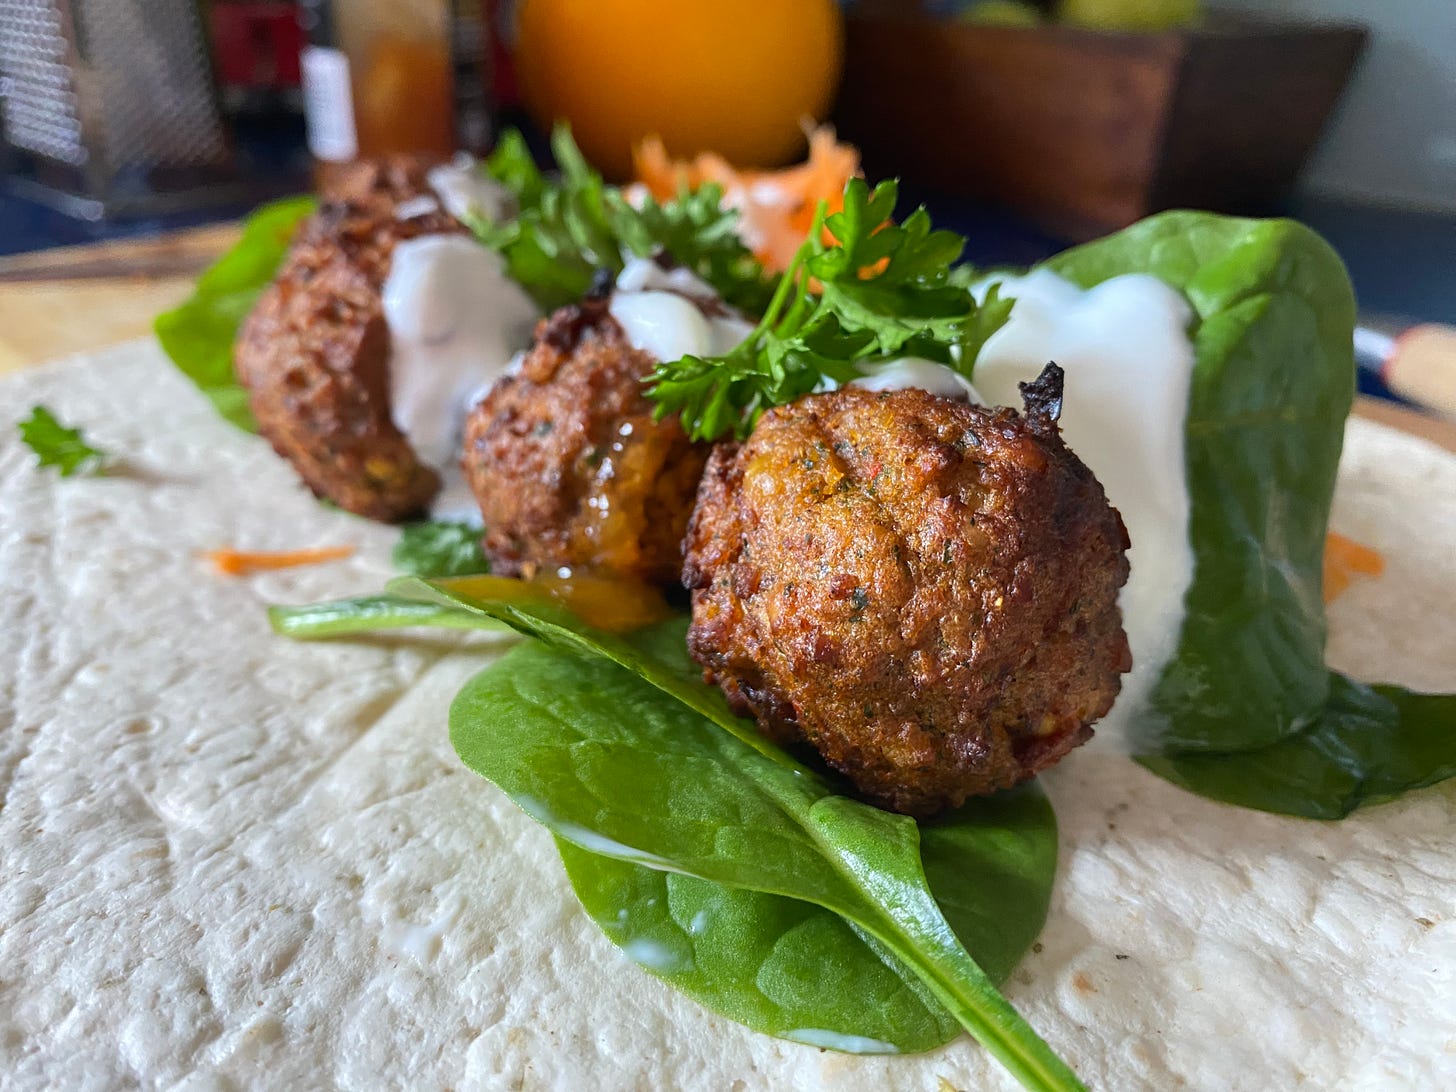 Tortilla wrap, topped with spinach leaves, falafel, yoghurt, grated carrot and fresh parsley